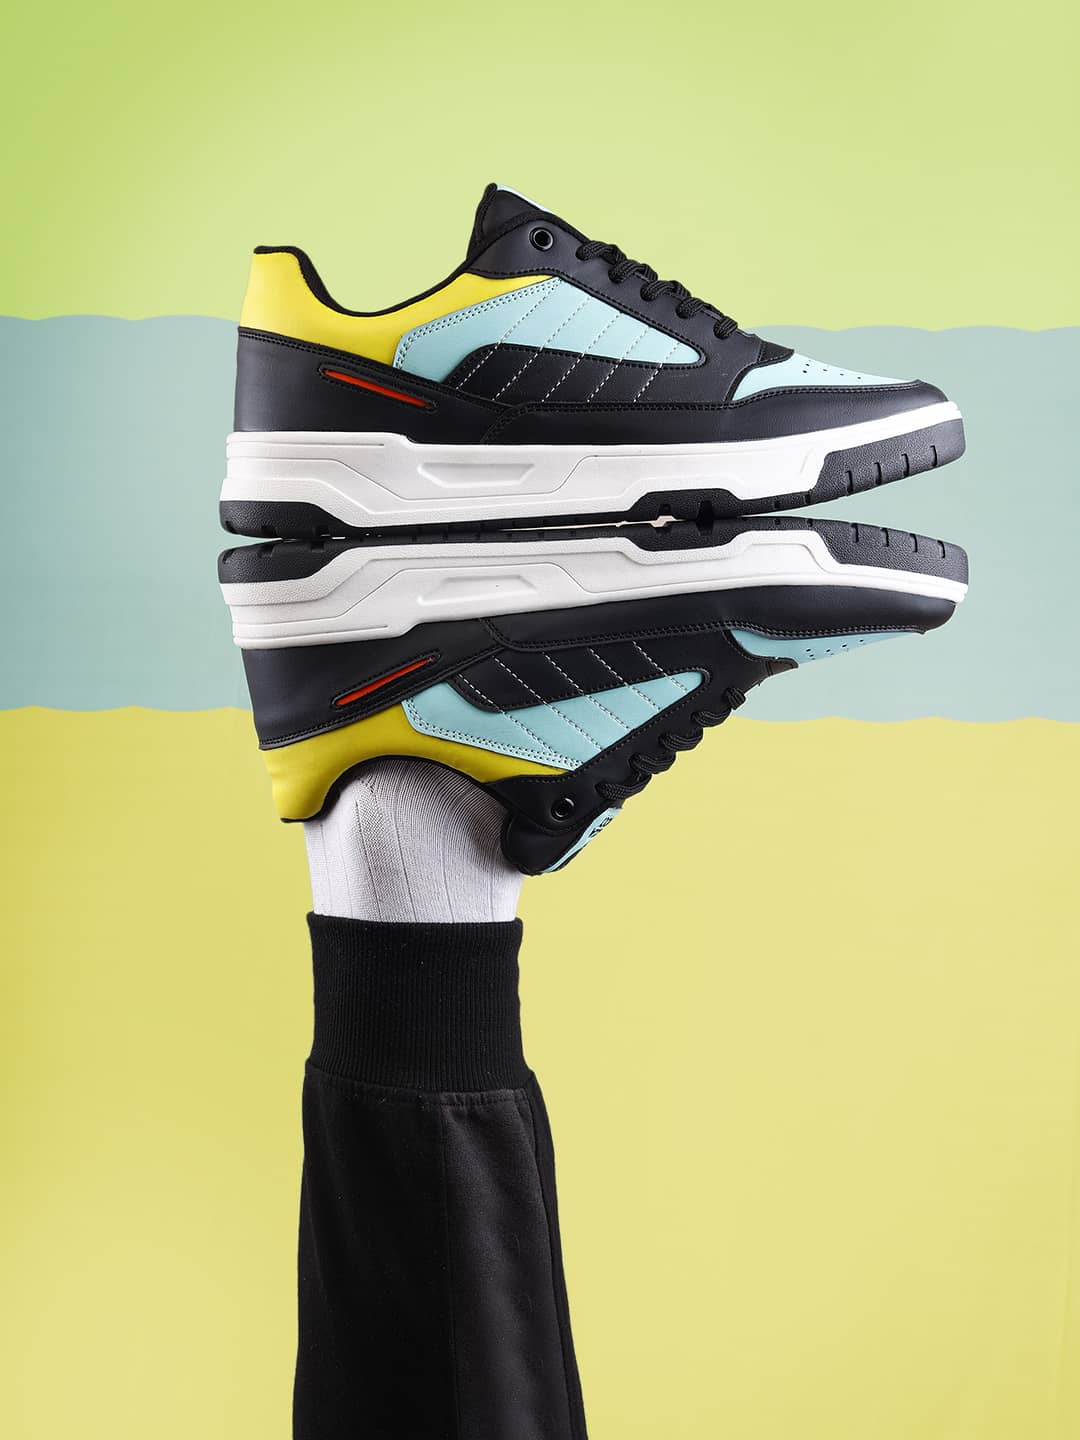 Bacca Bucci Downtown Dynamo Low-Top Sneakers: A Symphony of Style with Flat Outsole and Vibrant Color Blocking